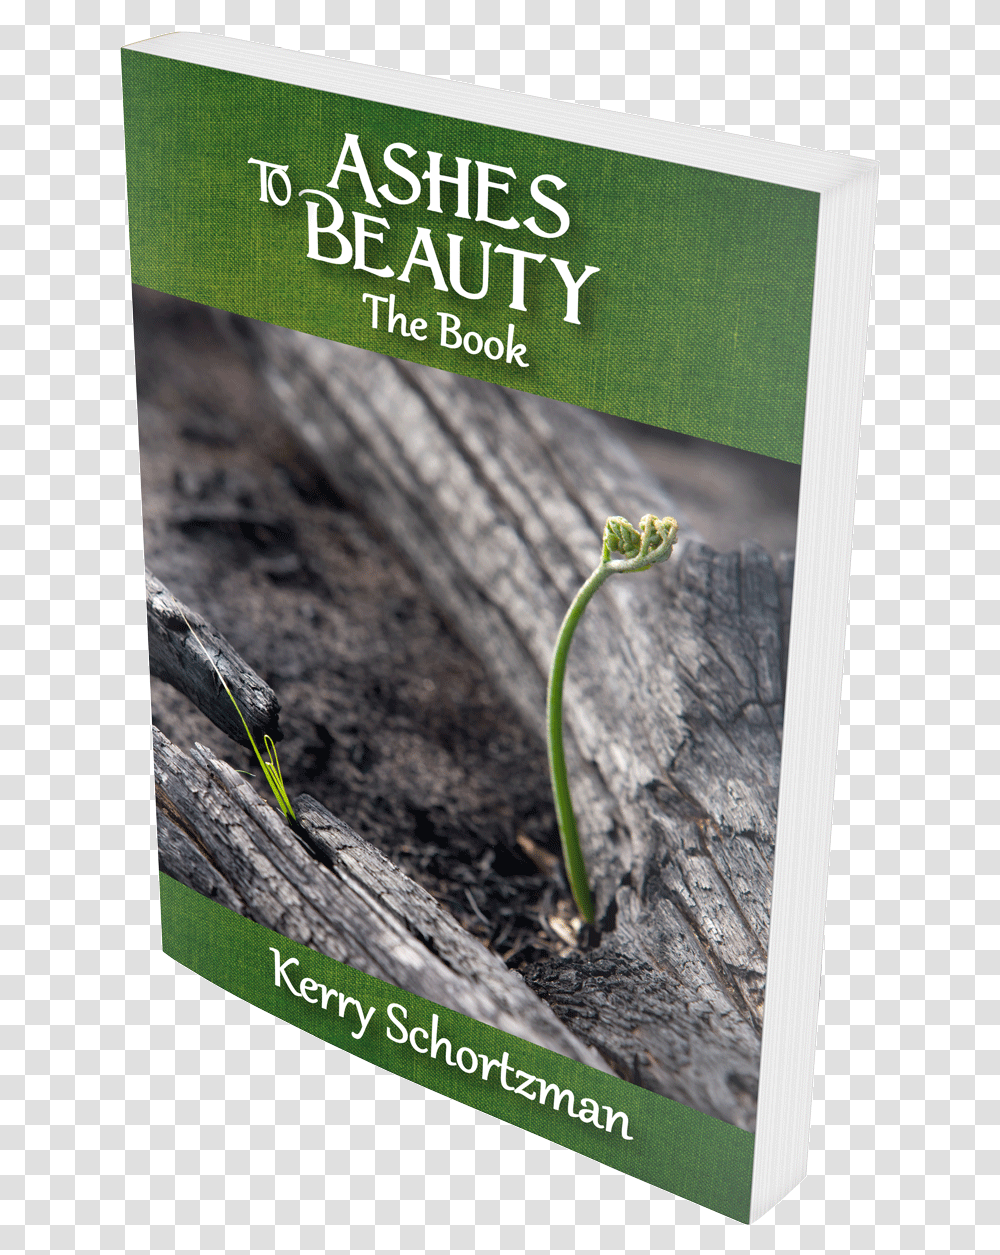 Ashes To Beauty The Book By Kerry Schortzman Flyer, Plant, Bud, Sprout, Flower Transparent Png